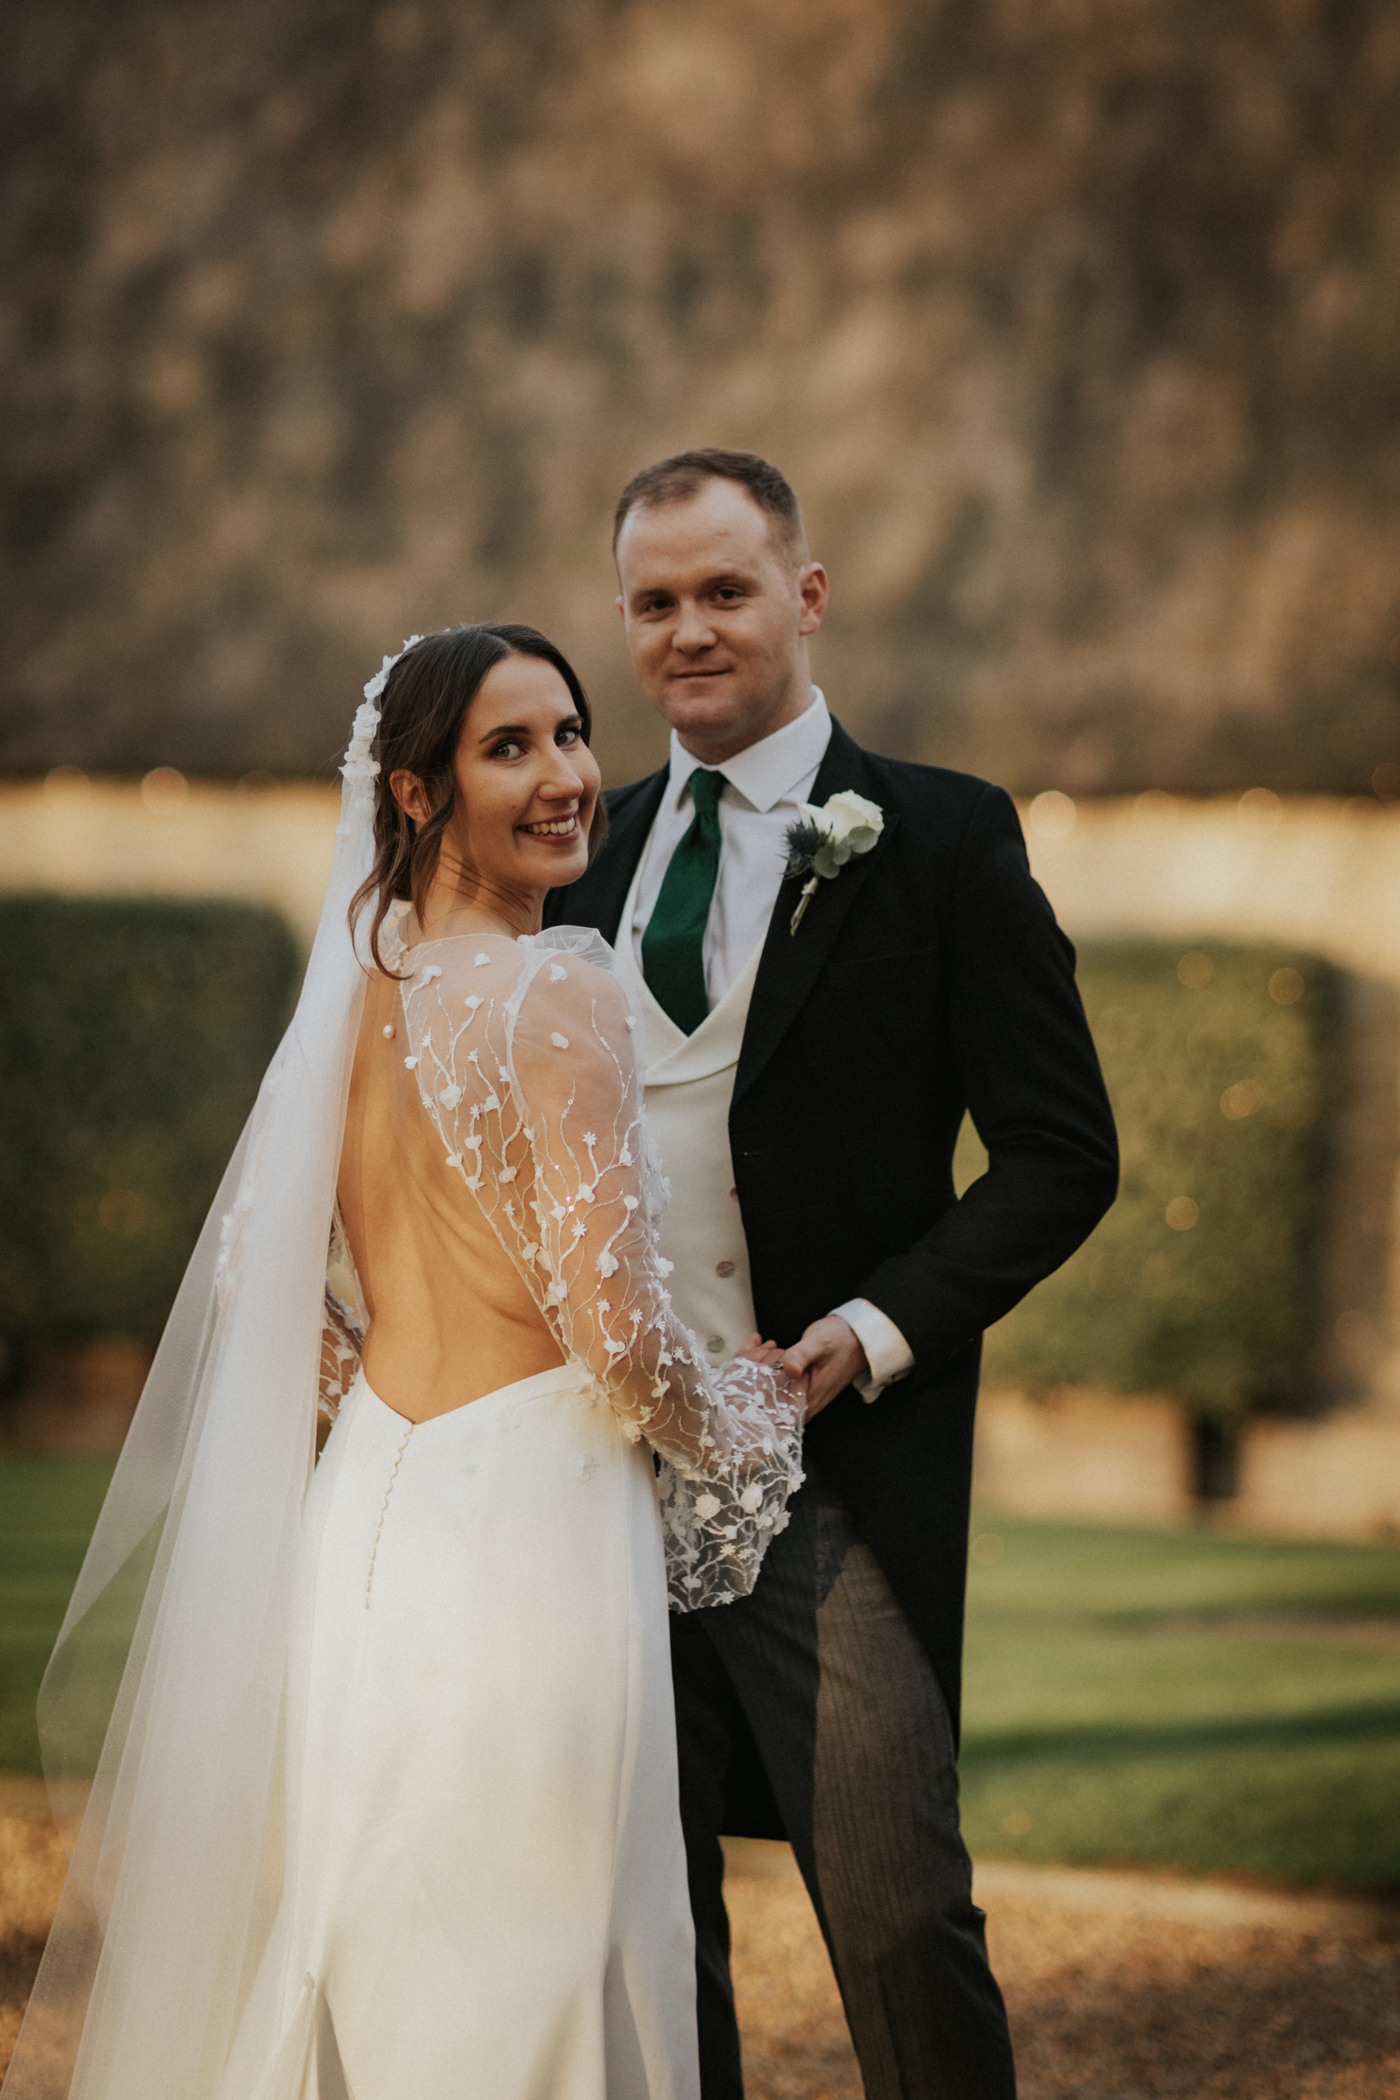 Bride in a backless Rime Arodaky wedding dress. Groom in traditional tails. Tythe Barn wedding venue, Oxfordshire.